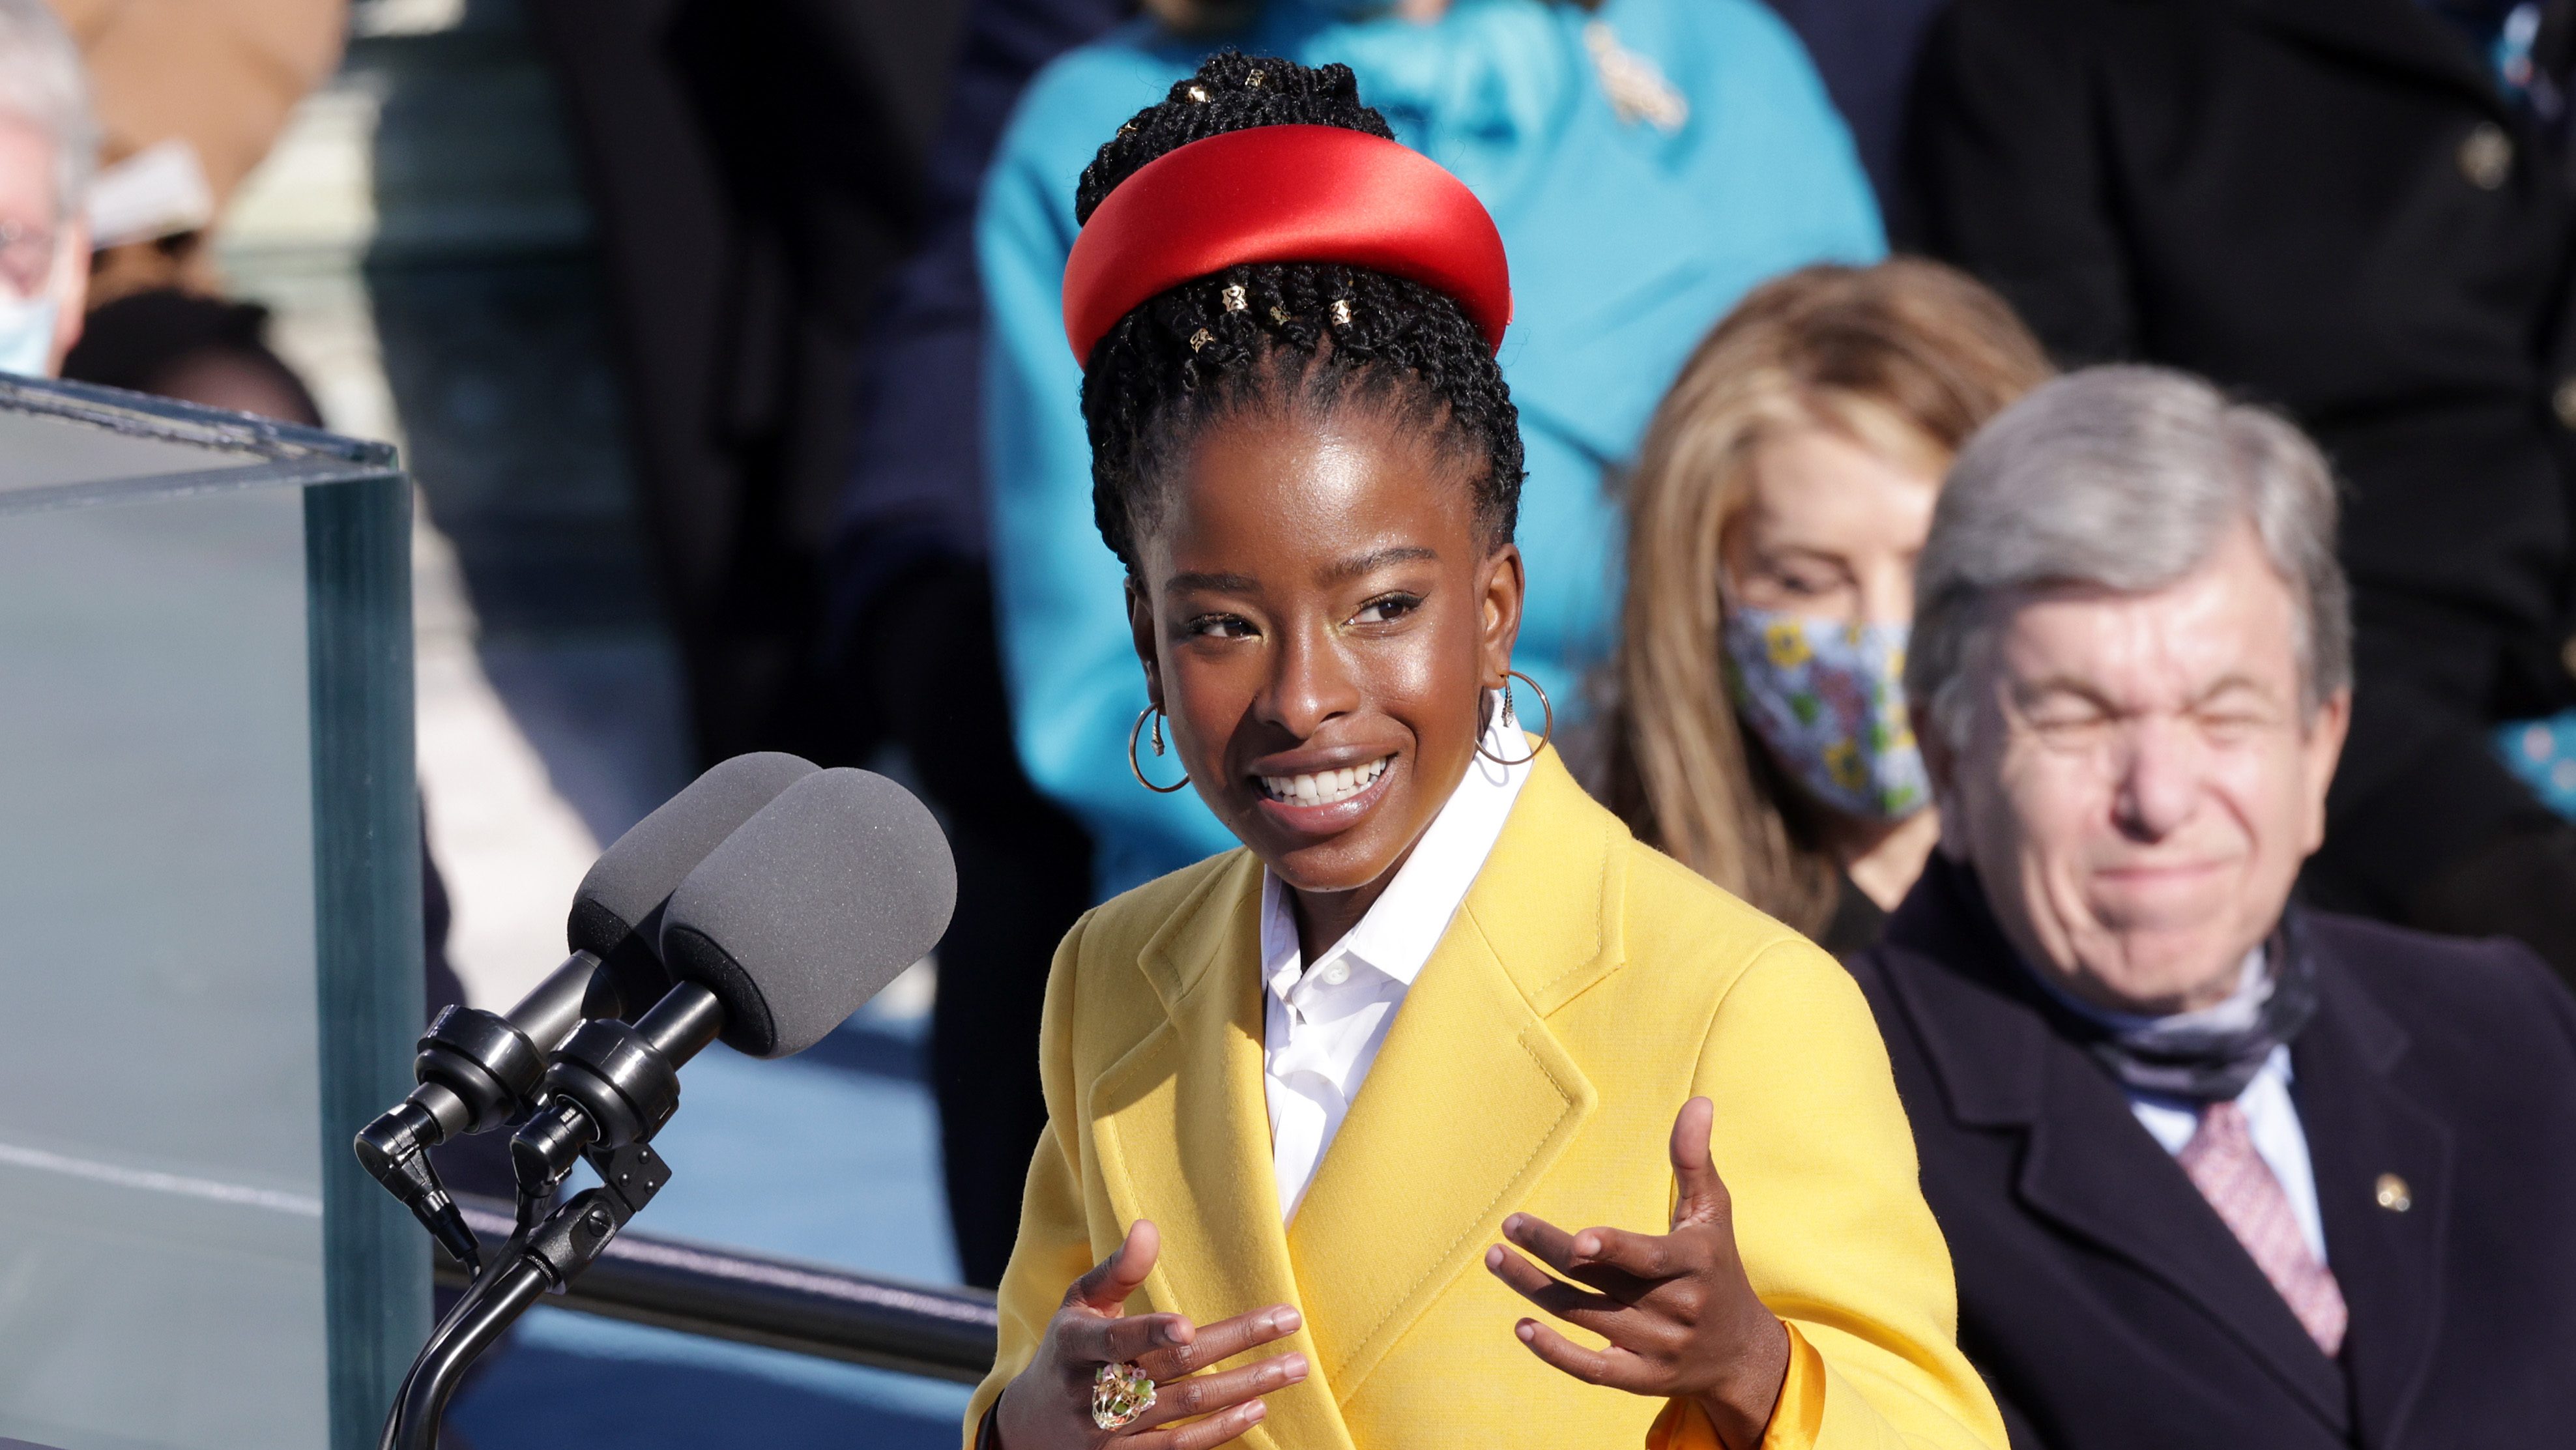 Youth Poet Laureate Amanda Gorman speaks at the inauguration of President Joe Biden on the West Front of the U.S. Capitol, Jan. 20, 2021 in Washington, D.C. (Alex Wong/Getty Images)